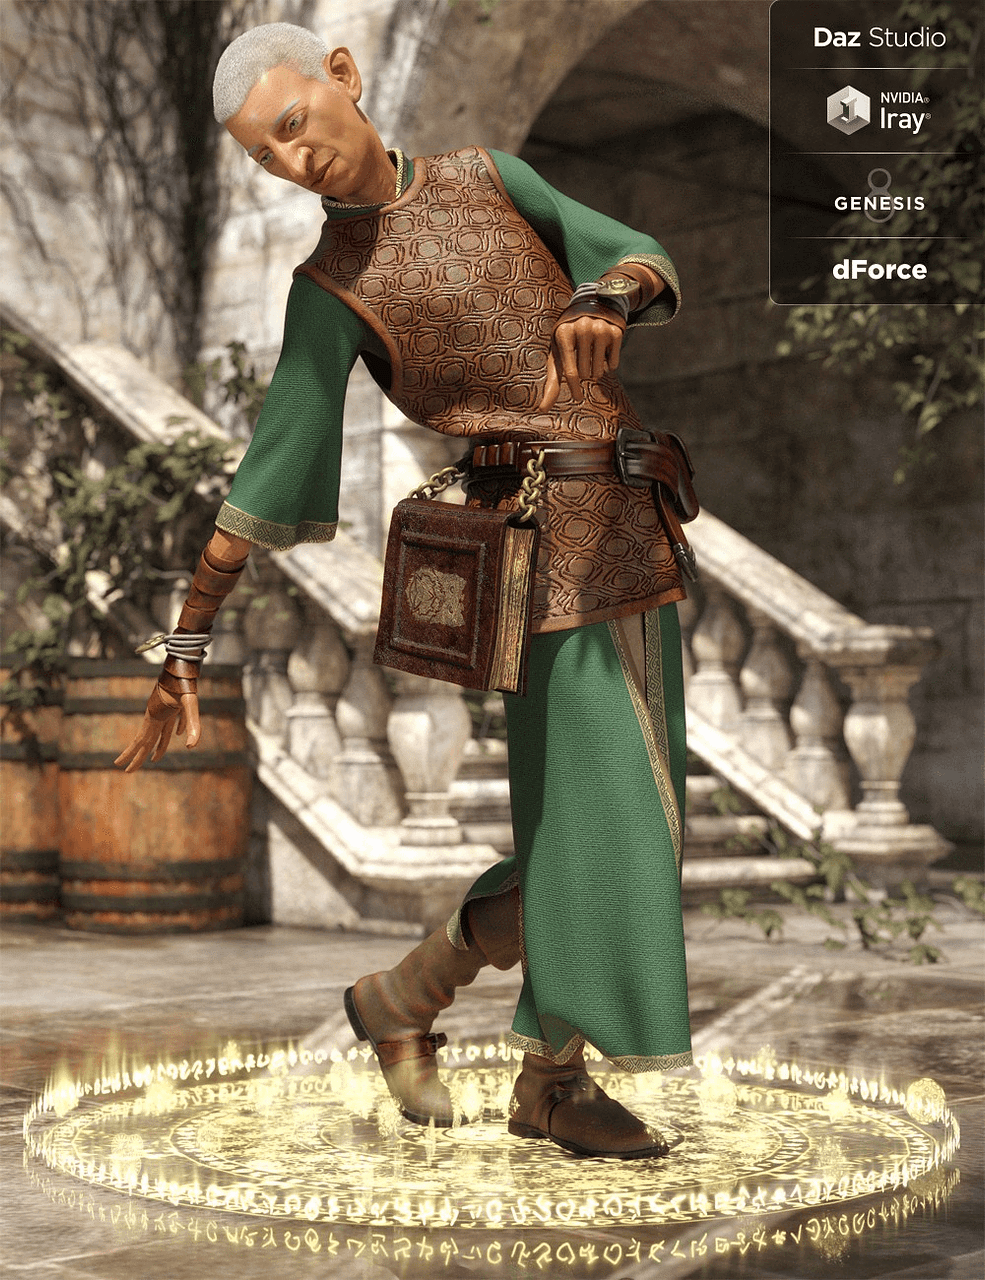 dforce outfit of cleric for daz studio